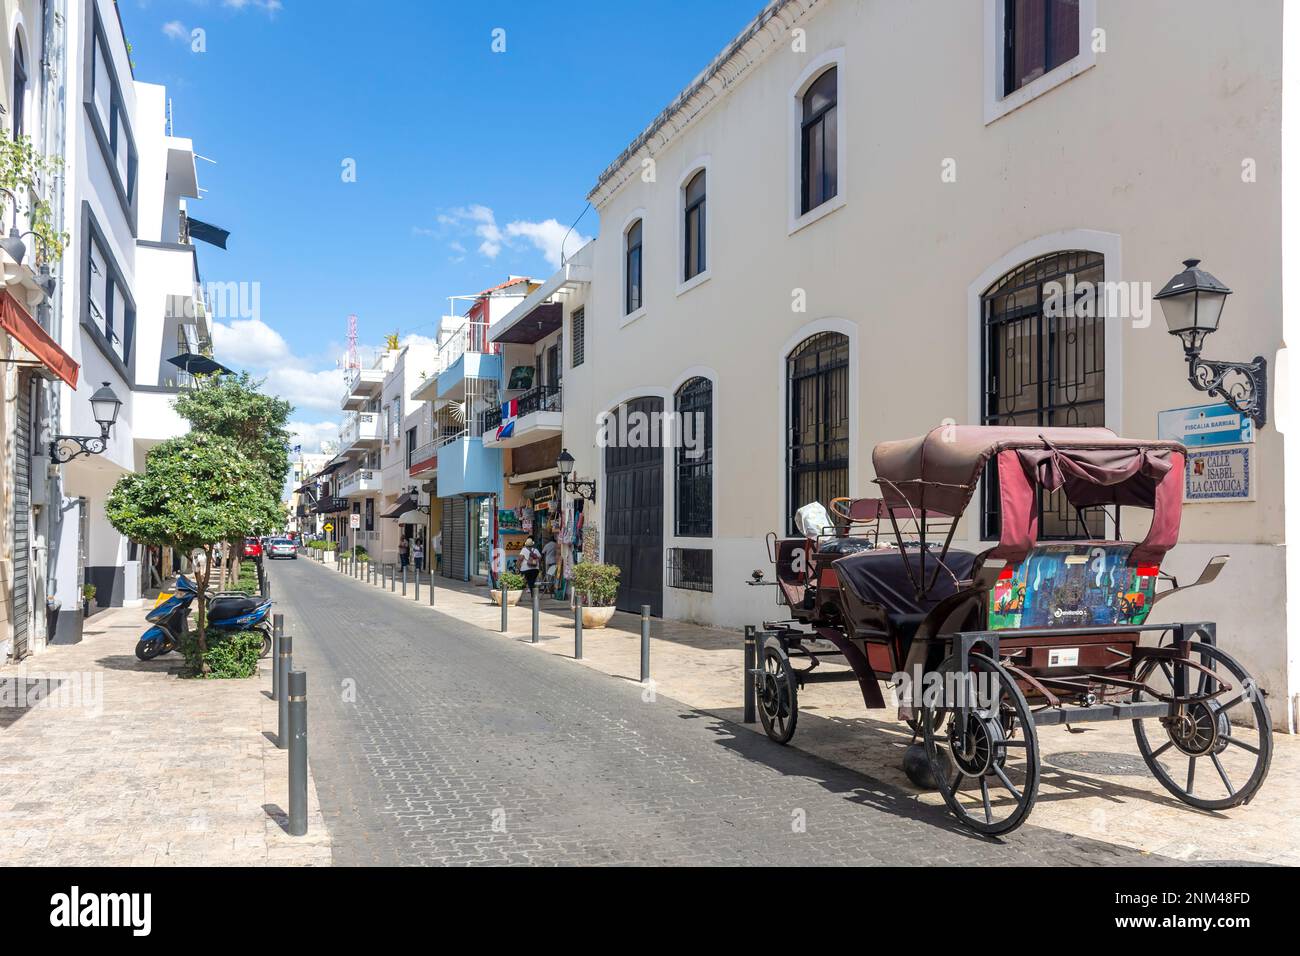 Street and horse carriage in Old Town, Calle Isabel La Catolica, Santo Domingo, Dominican Republic, Greater Antilles, Caribbean Stock Photo